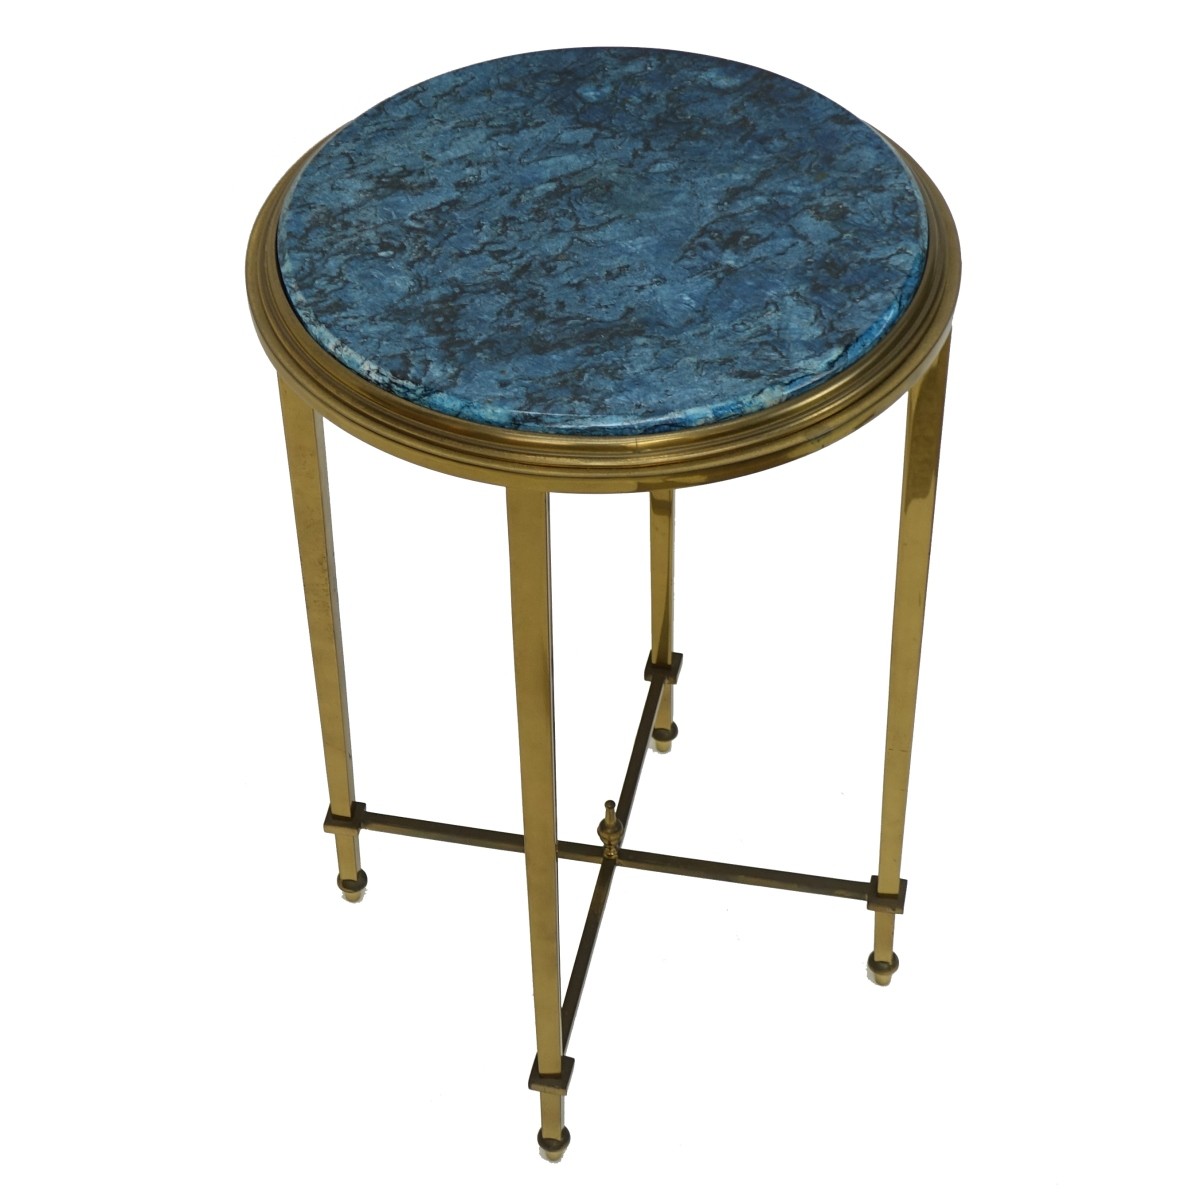 Bronze and Granite Side Table